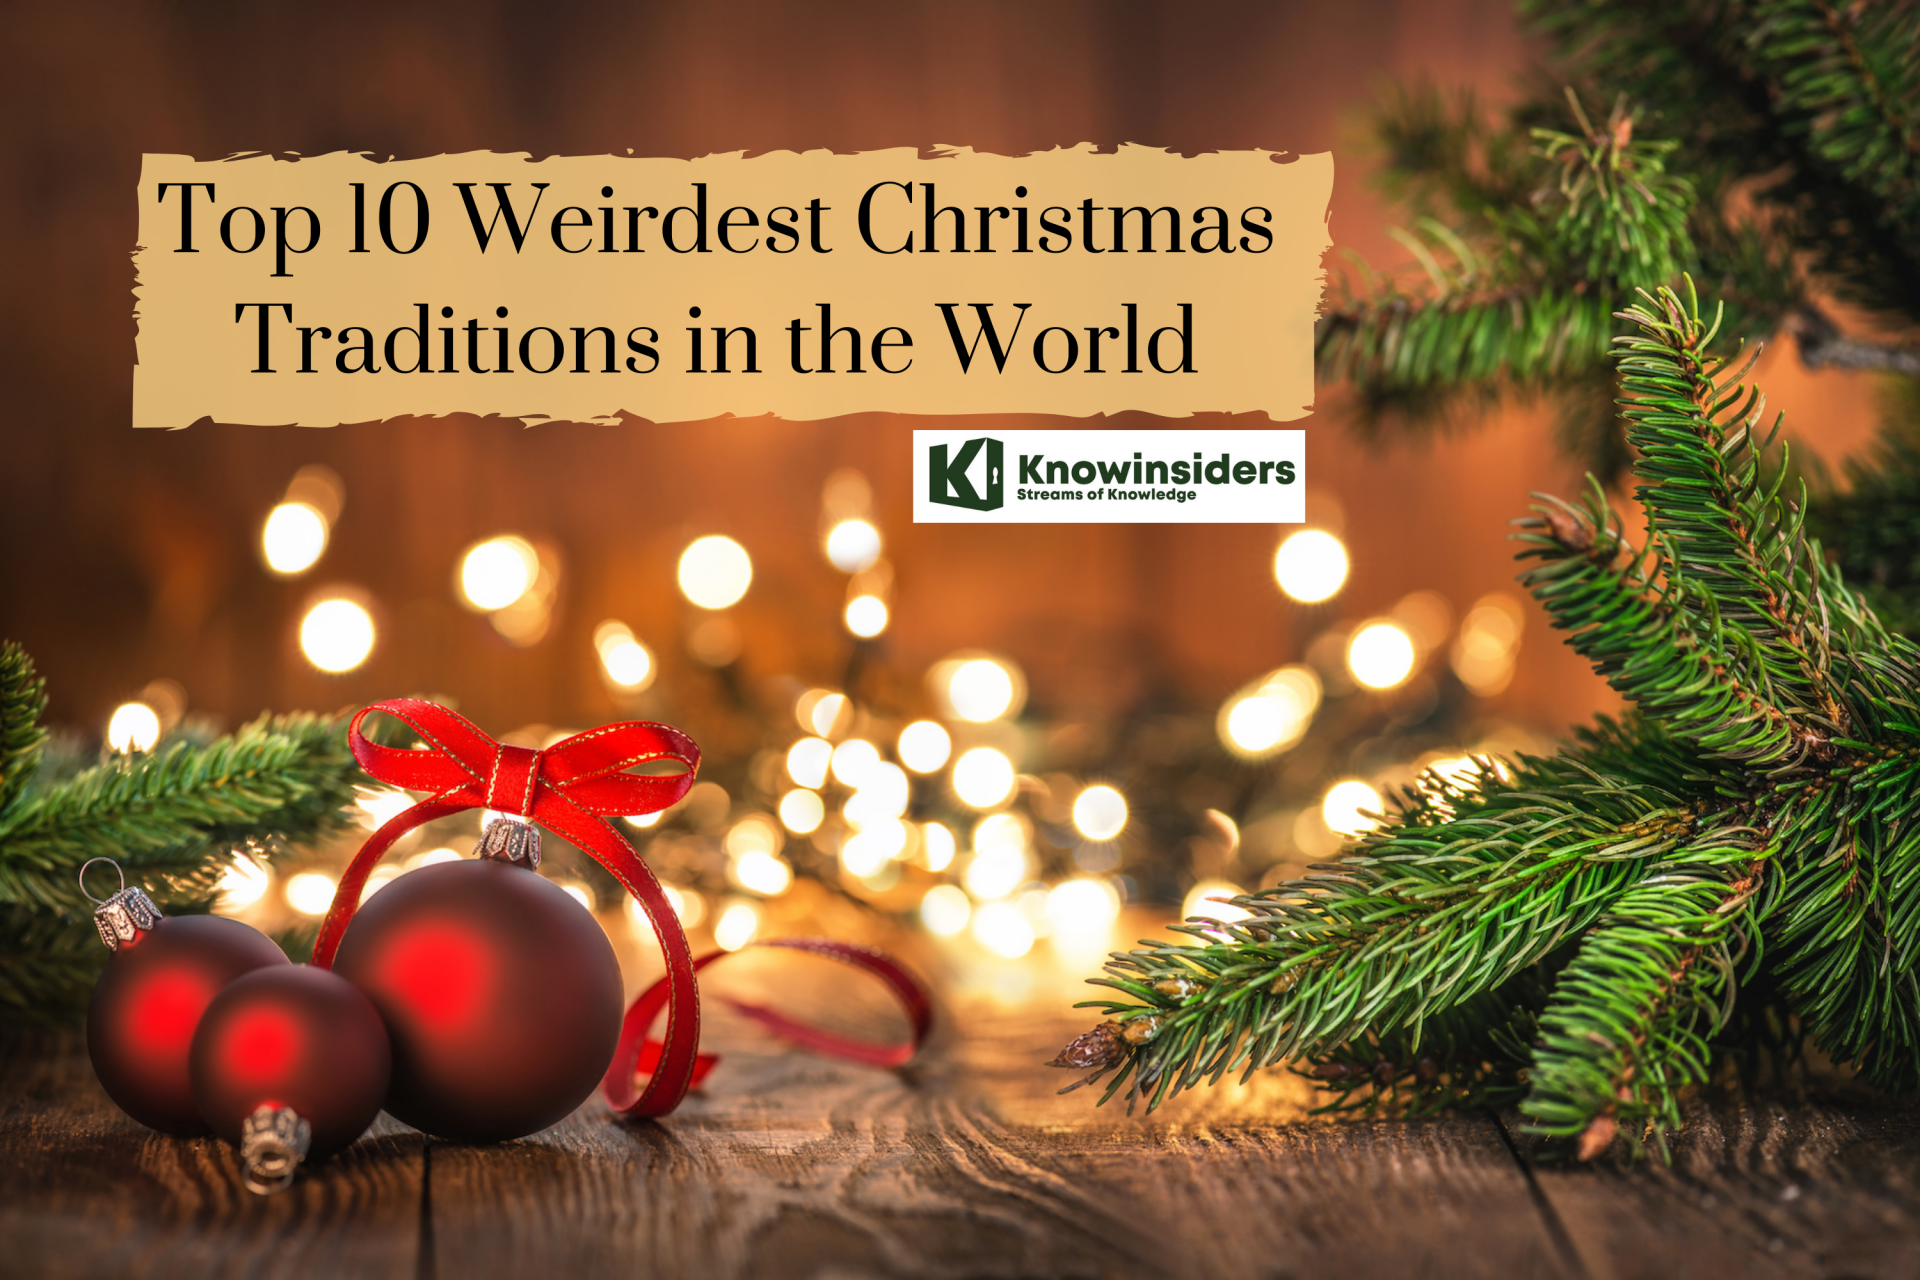 Top 10 Weirdest Christmas Traditions in the World